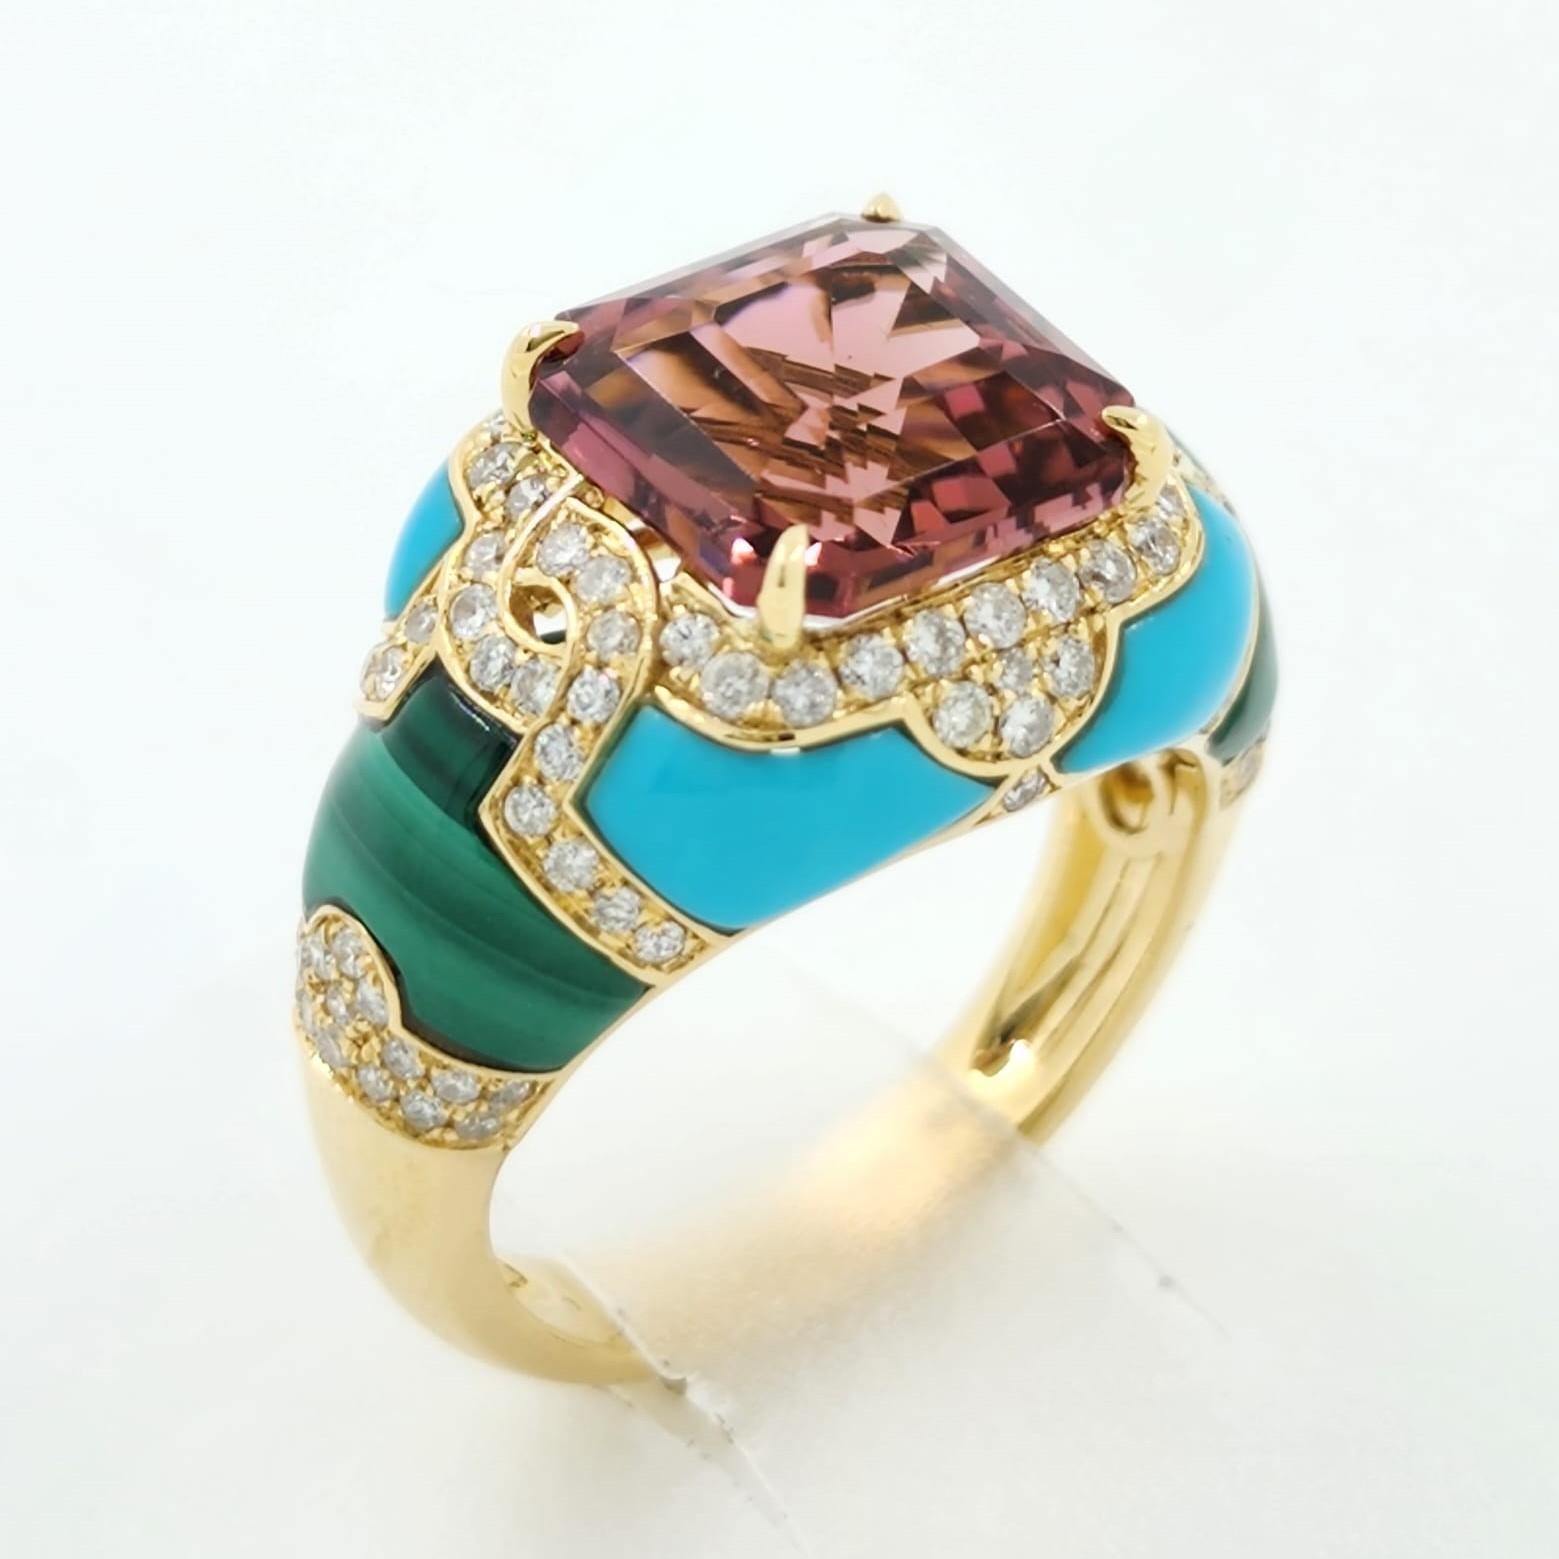 4.21 Carat Tourmaline Turquoise Diamond Cocktail Ring in 18 Karat Yellow Gold In New Condition For Sale In Hong Kong, HK